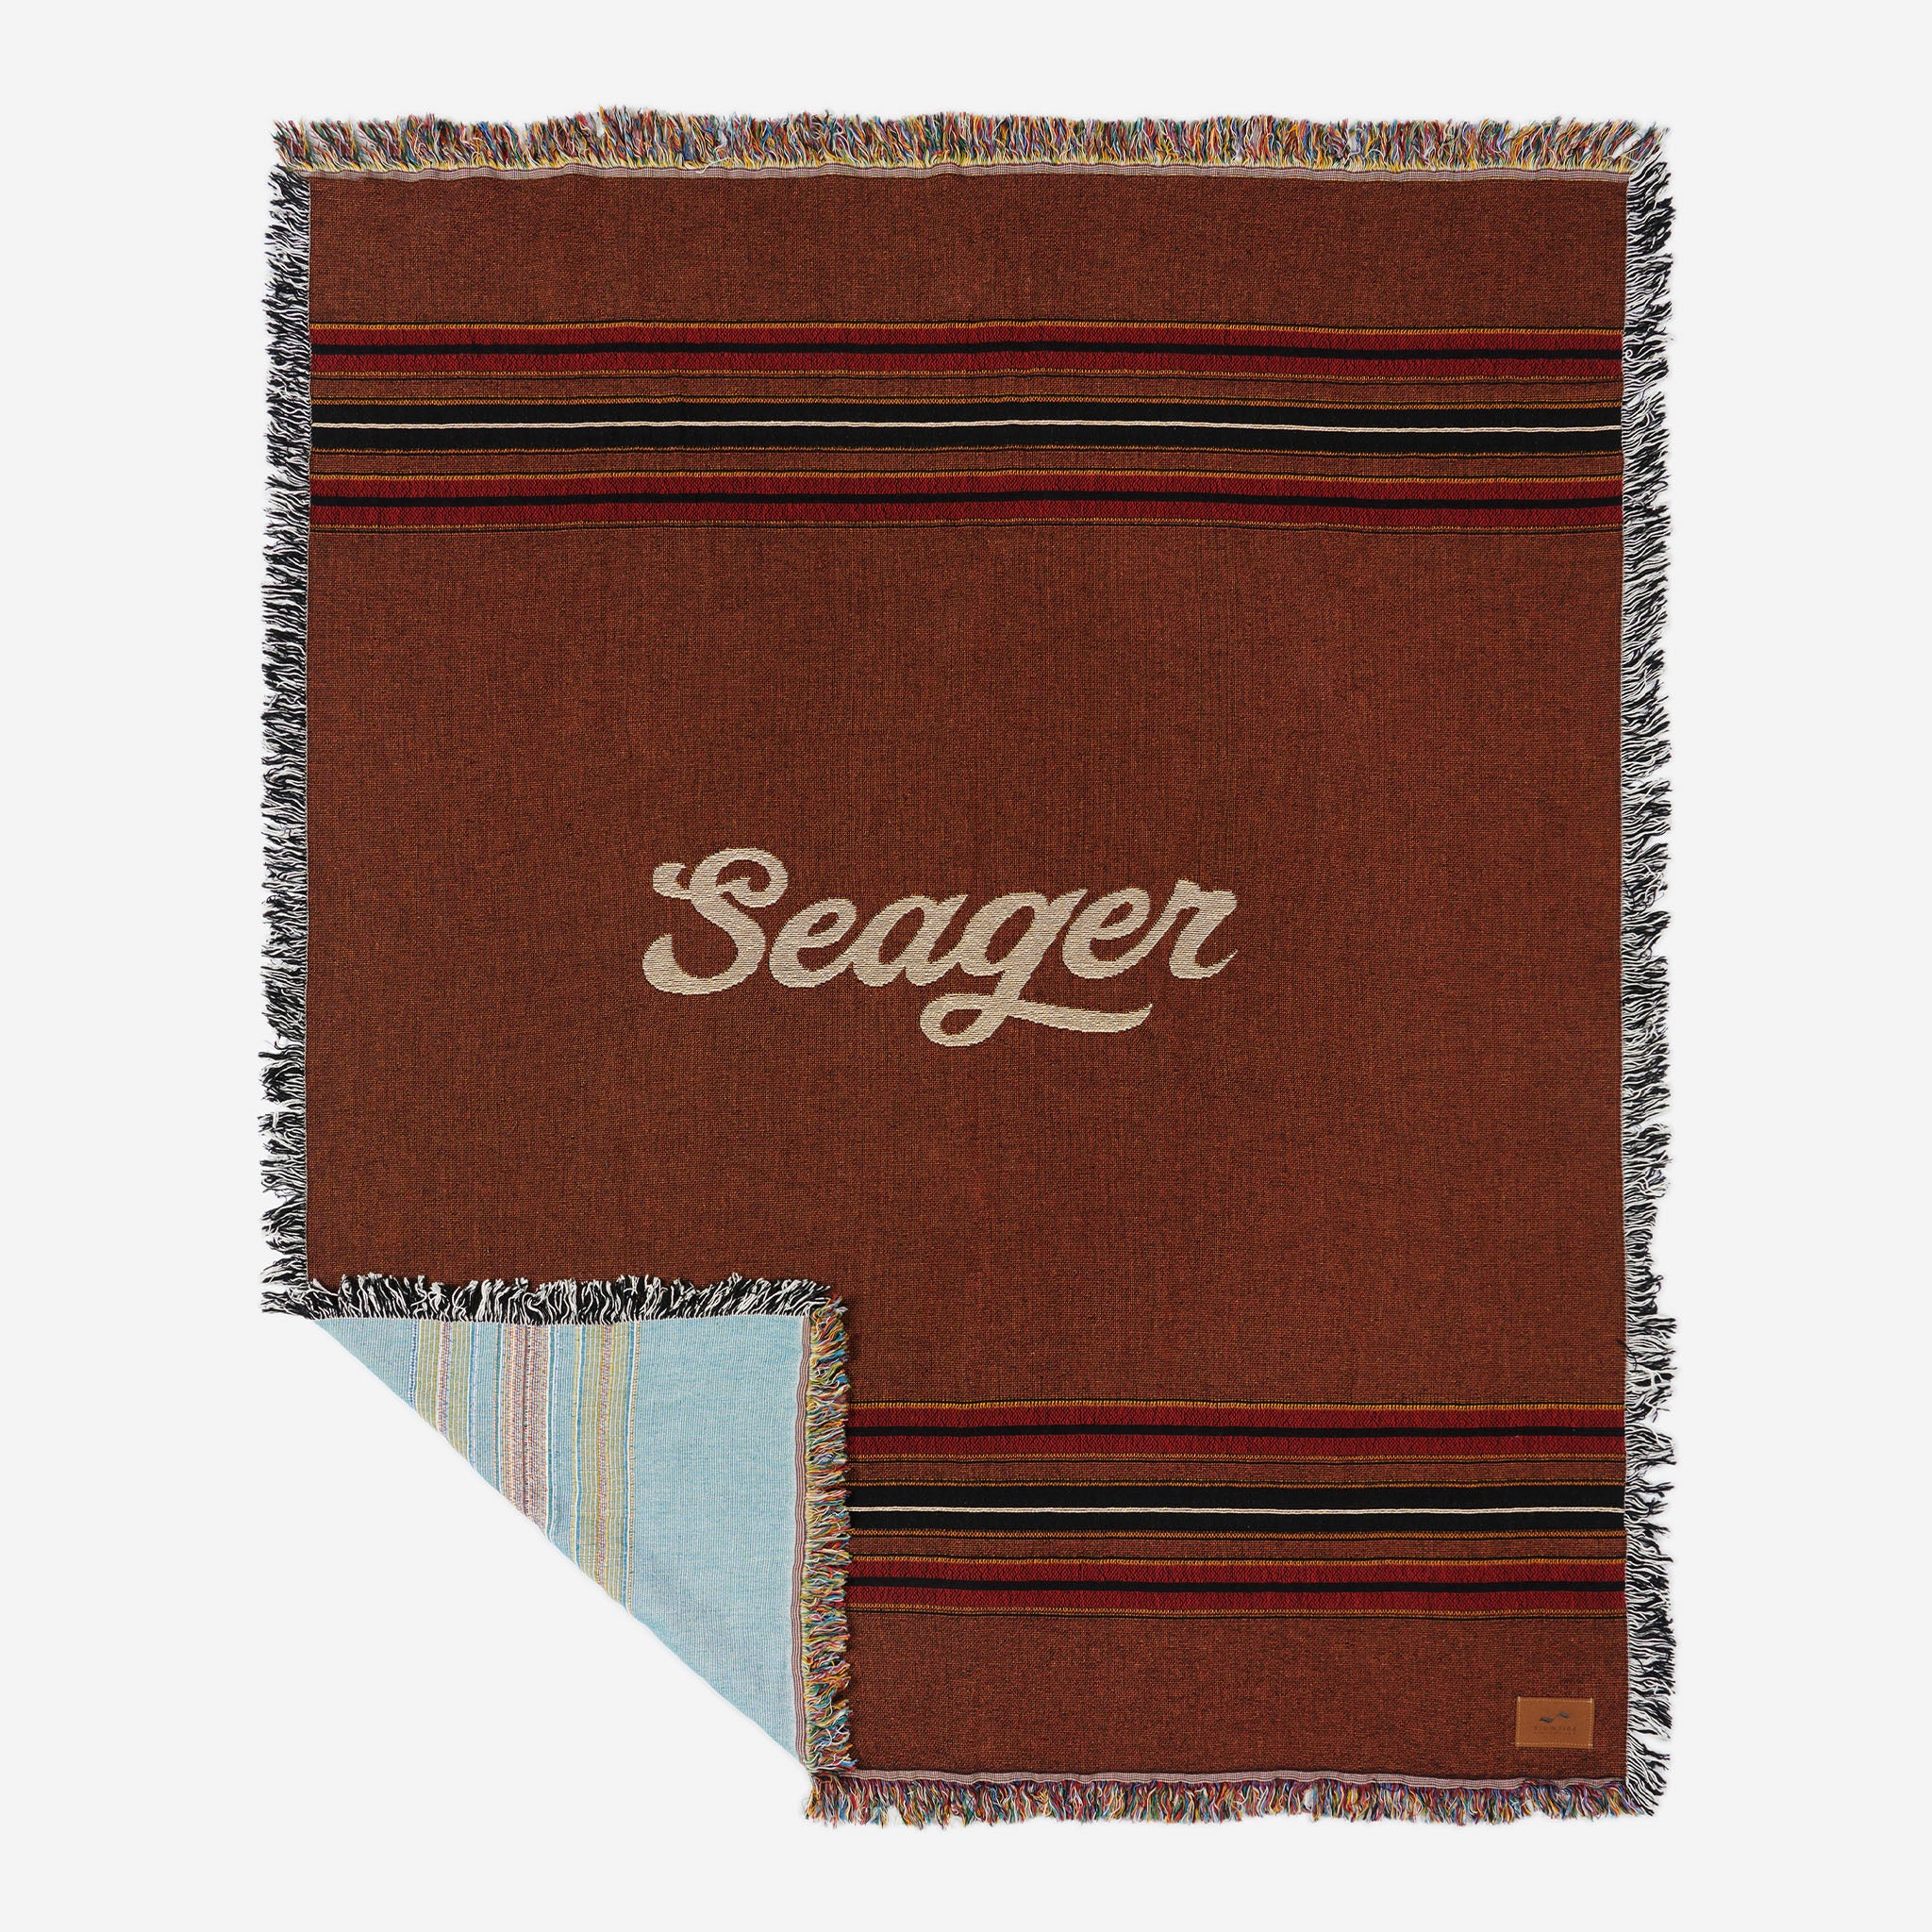 Seager x Slowtide Tapestry Blanket Striped Brown